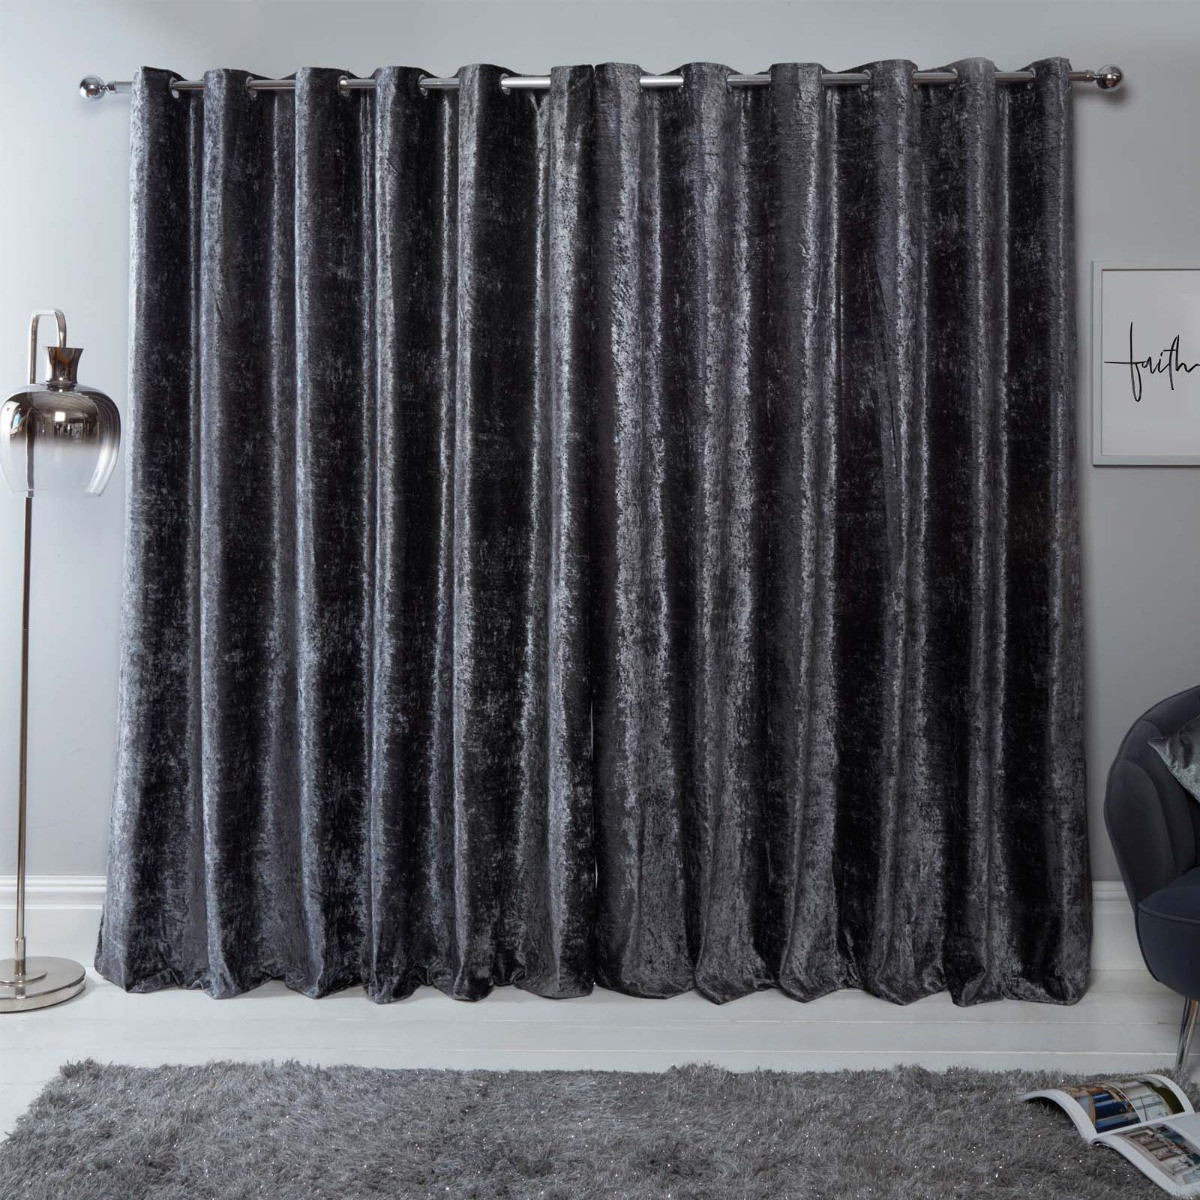 Sienna Home Crushed Velvet Eyelet Curtains - Charcoal Grey 46" x 54">